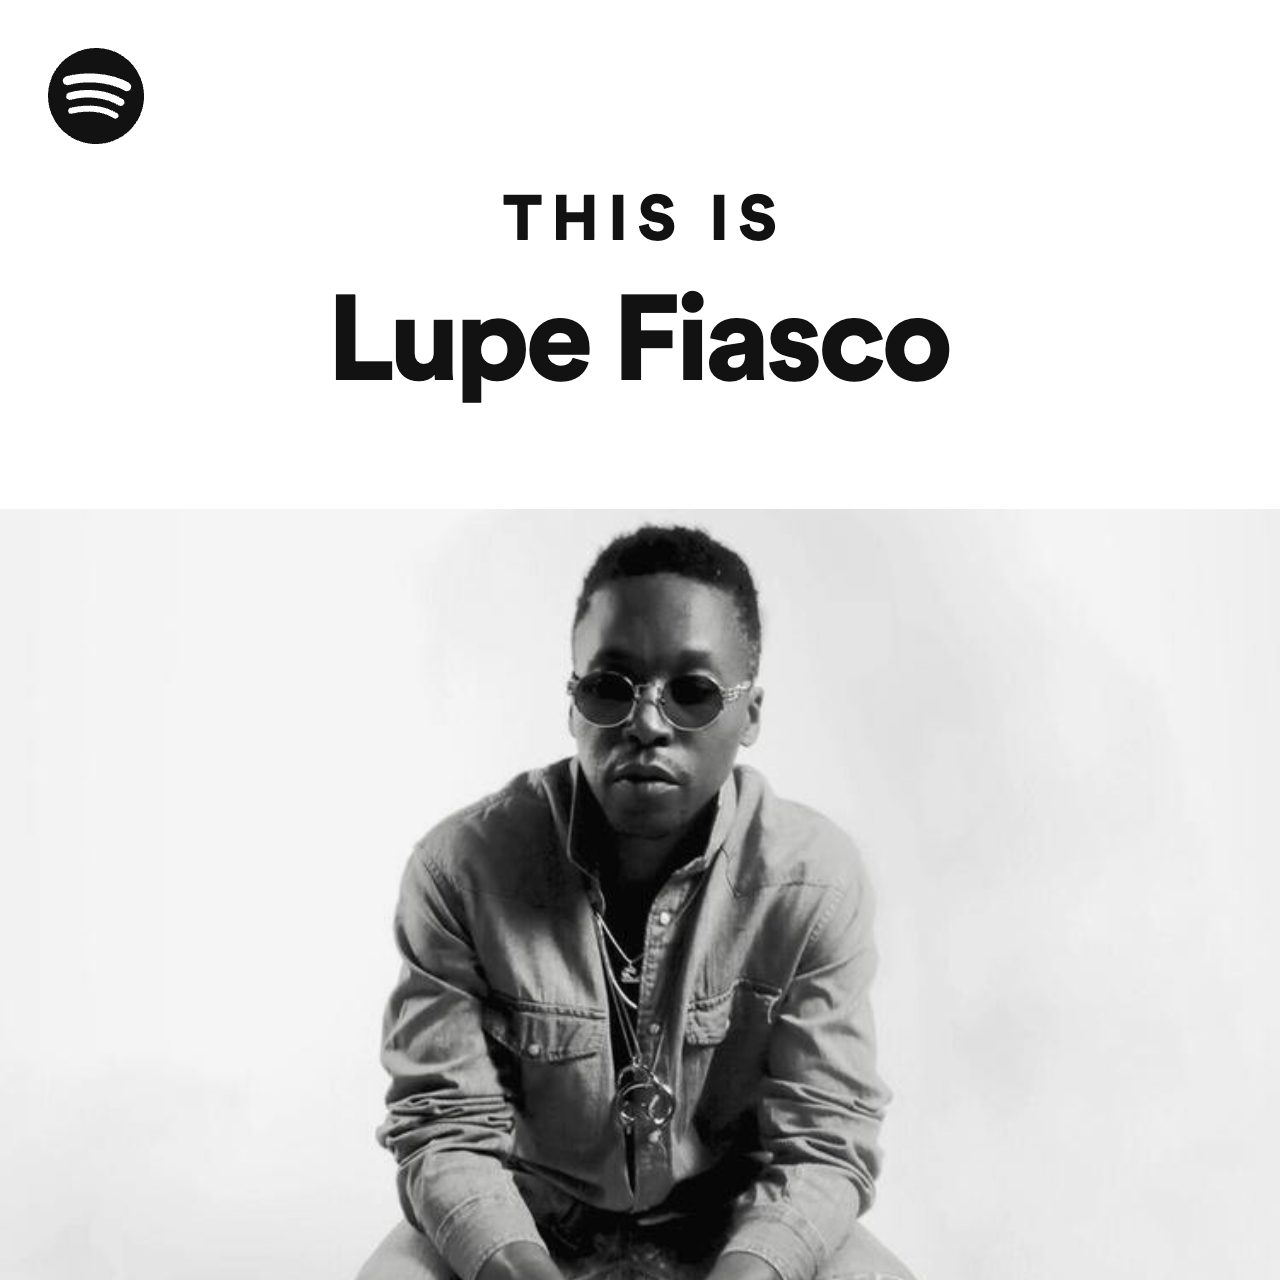 This Is Lupe Fiasco